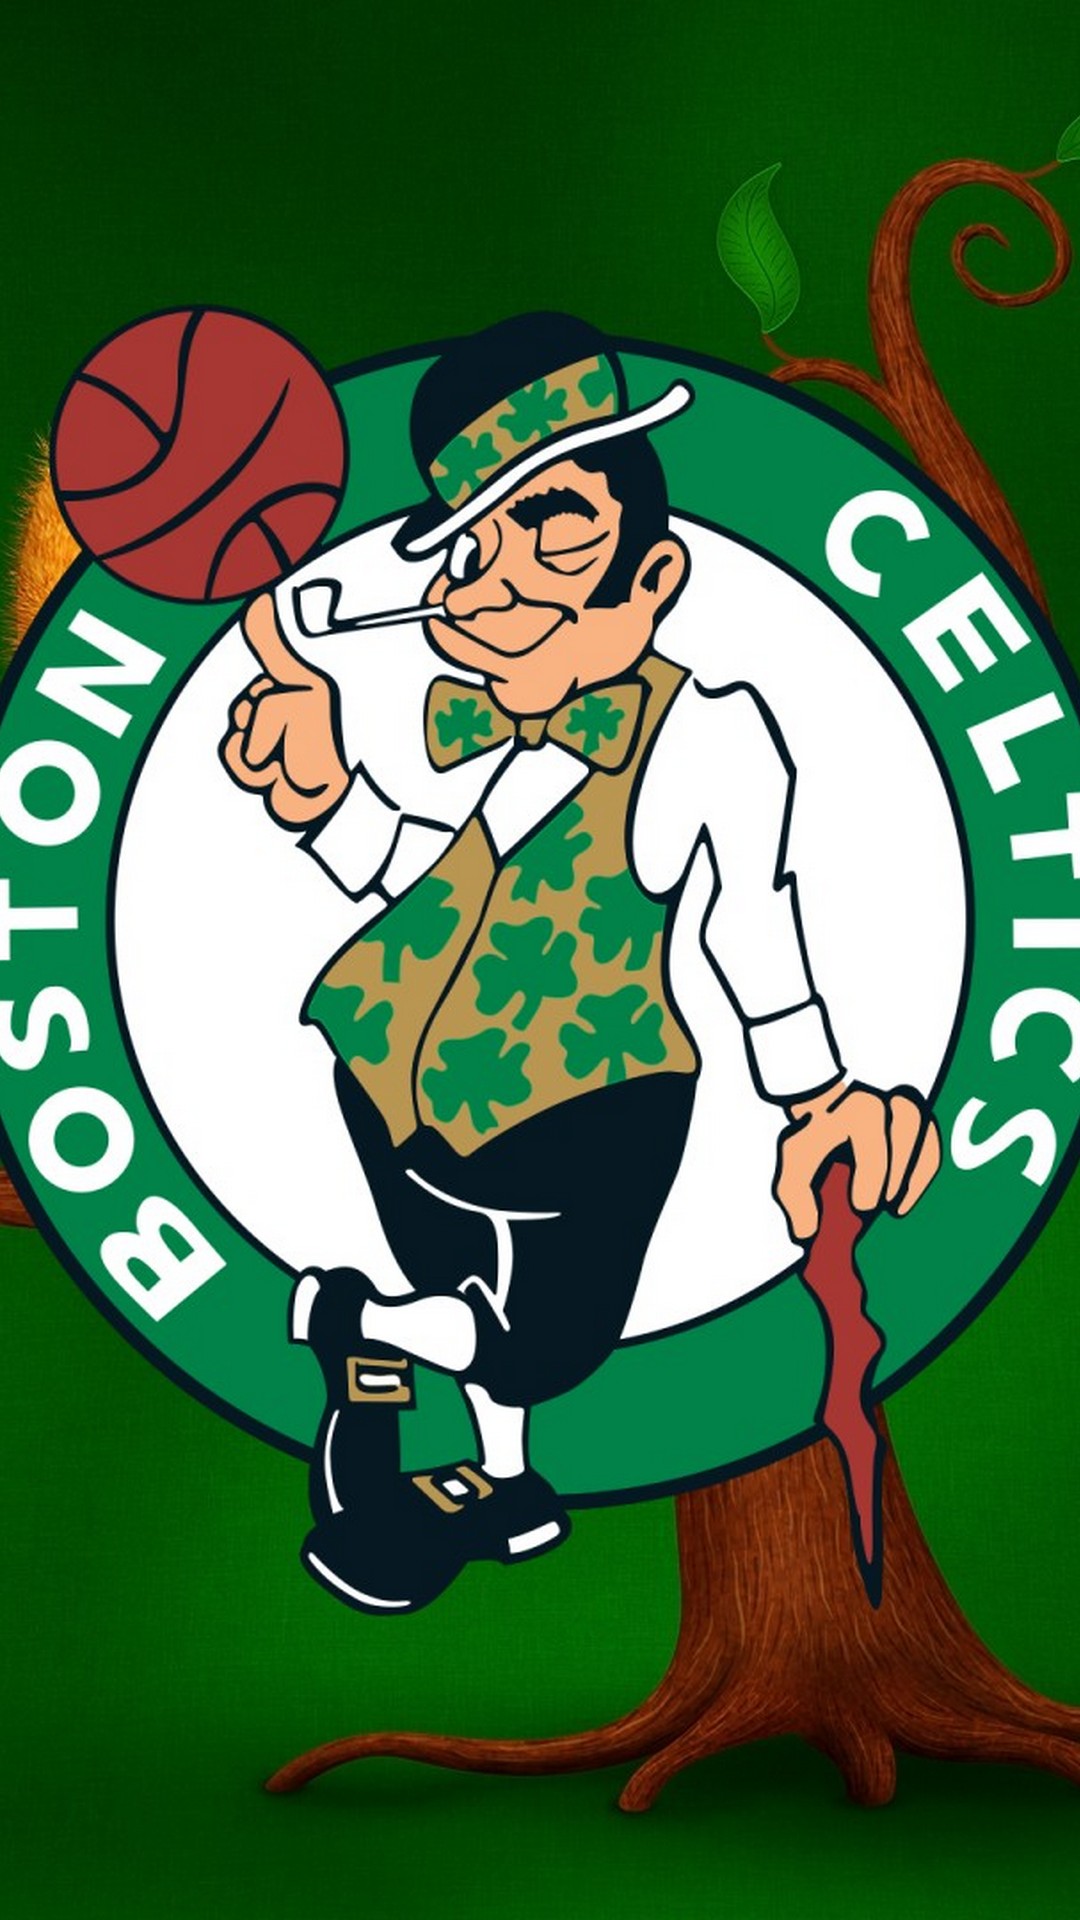 Wallpaper Boston Celtics Android with image resolution 1080x1920 pixel. You can make this wallpaper for your Android backgrounds, Tablet, Smartphones Screensavers and Mobile Phone Lock Screen